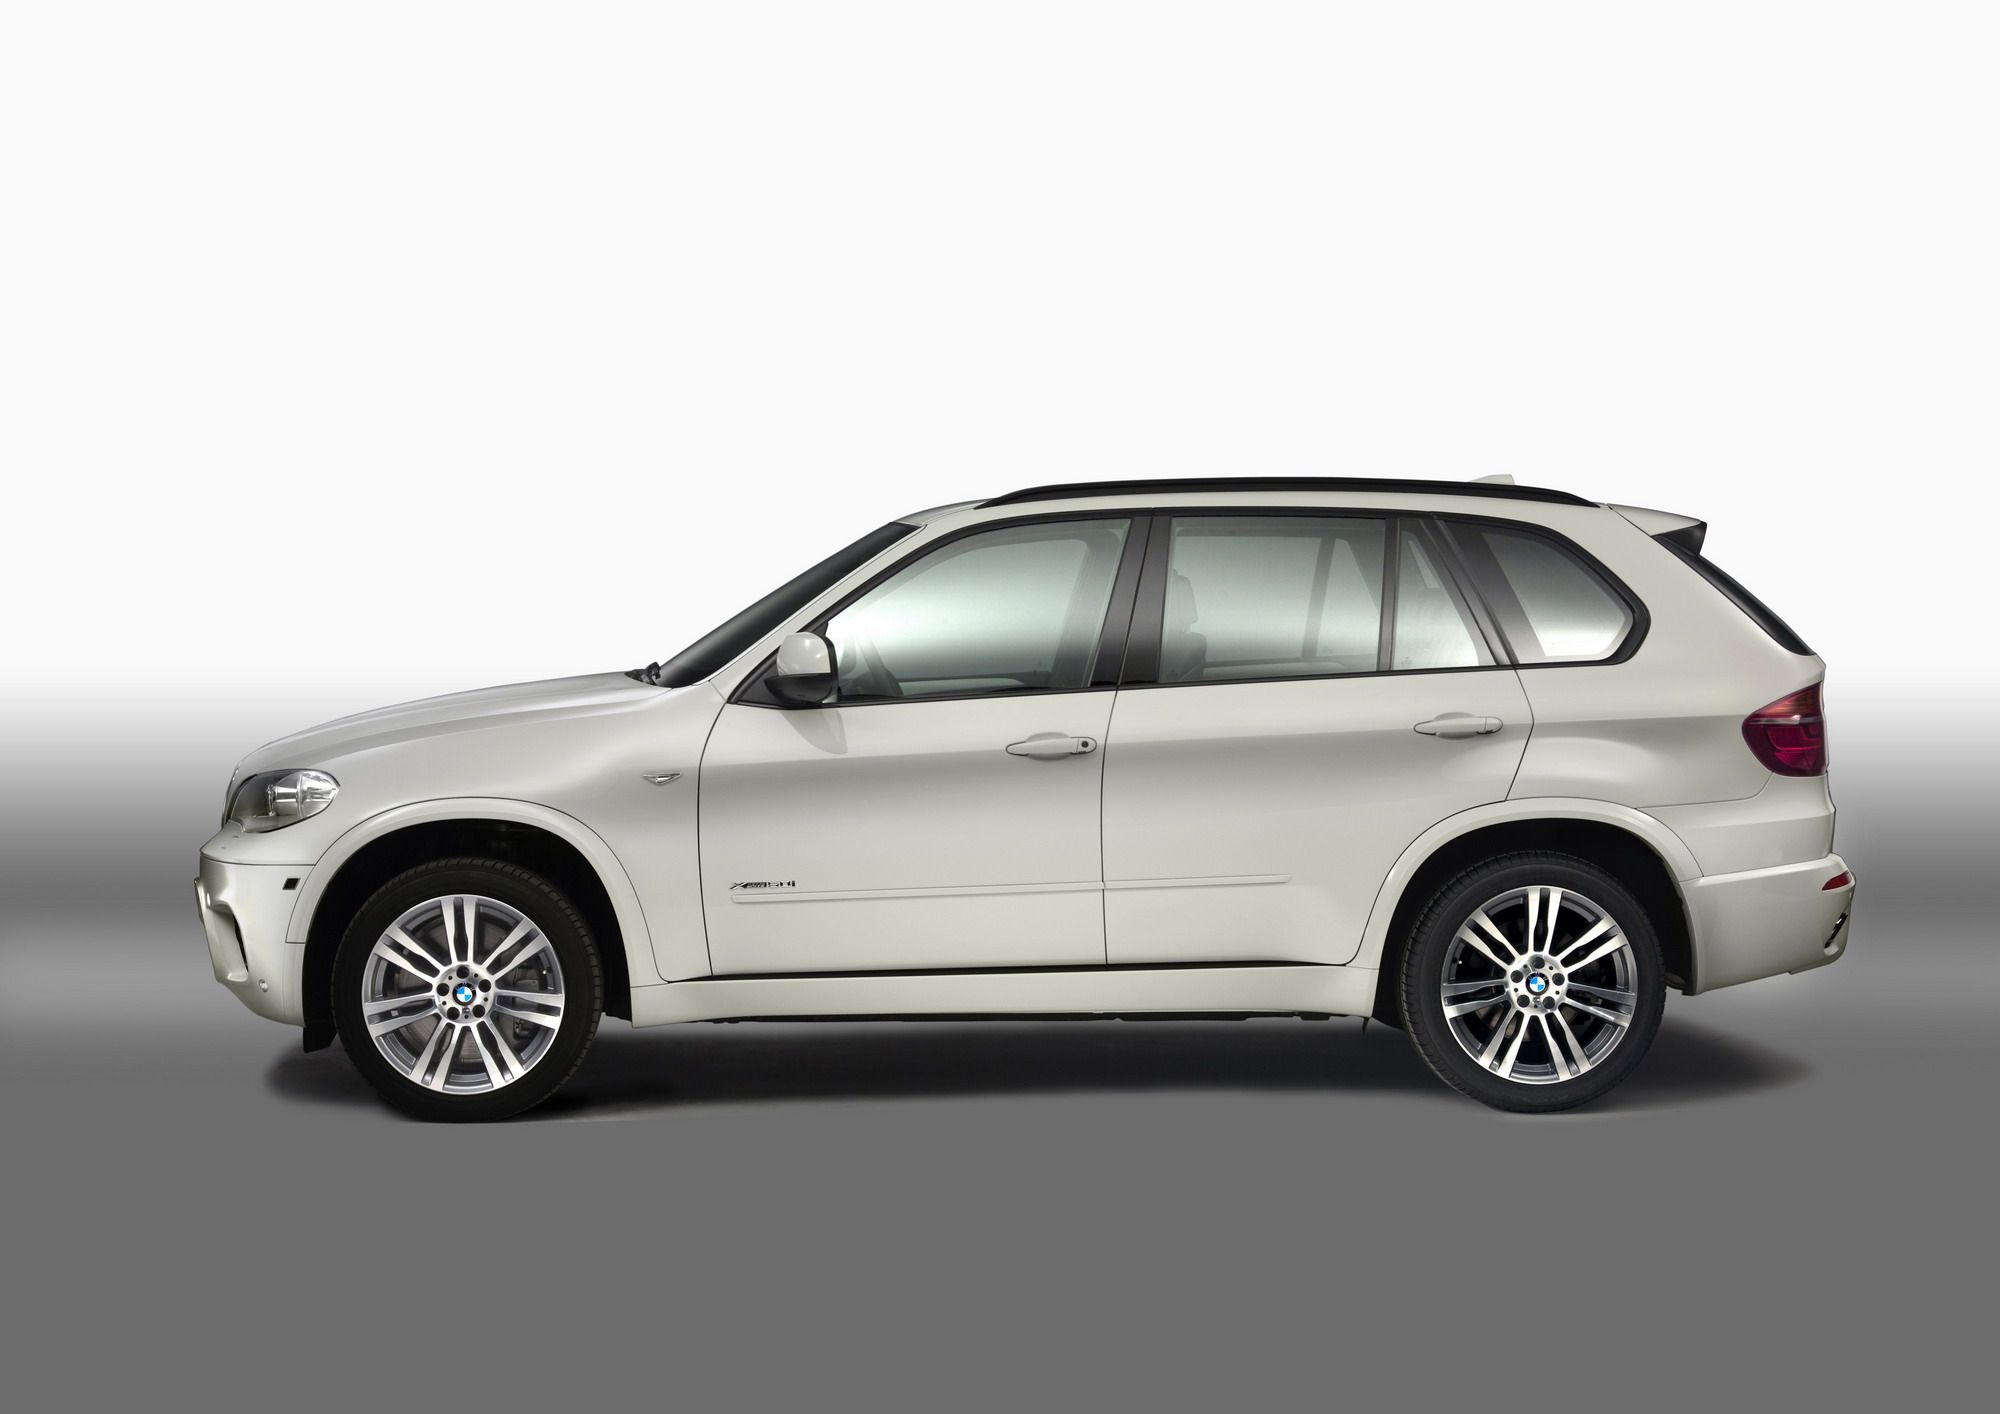 2010 BMW X5 with M Sports package